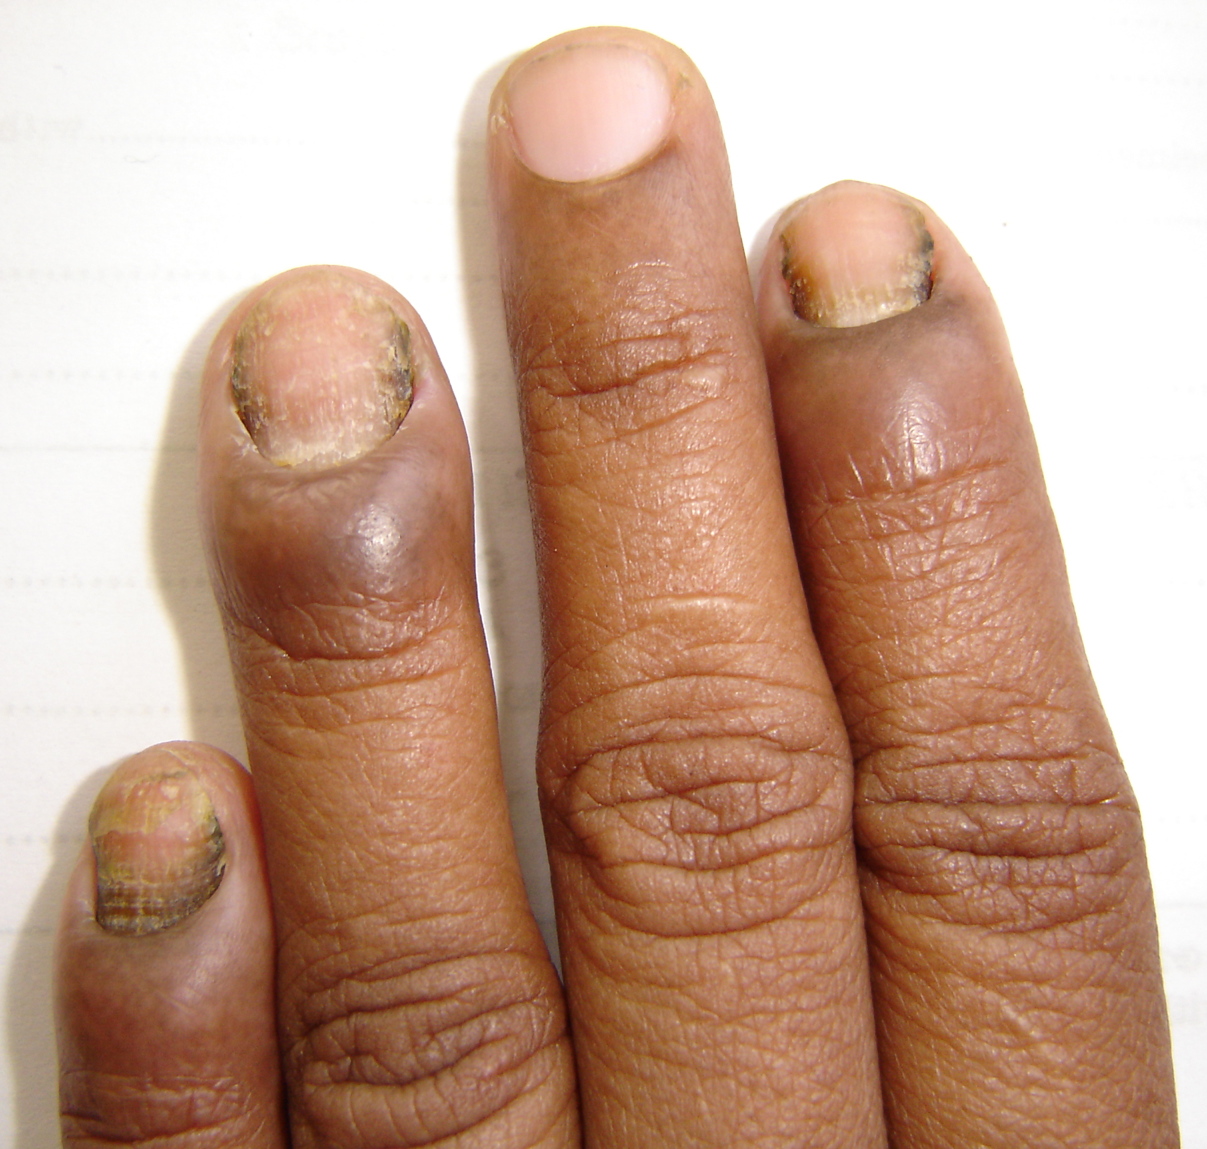 Nails, Skin, and Callus Treatment | Wound Specialist Physician | DeLand